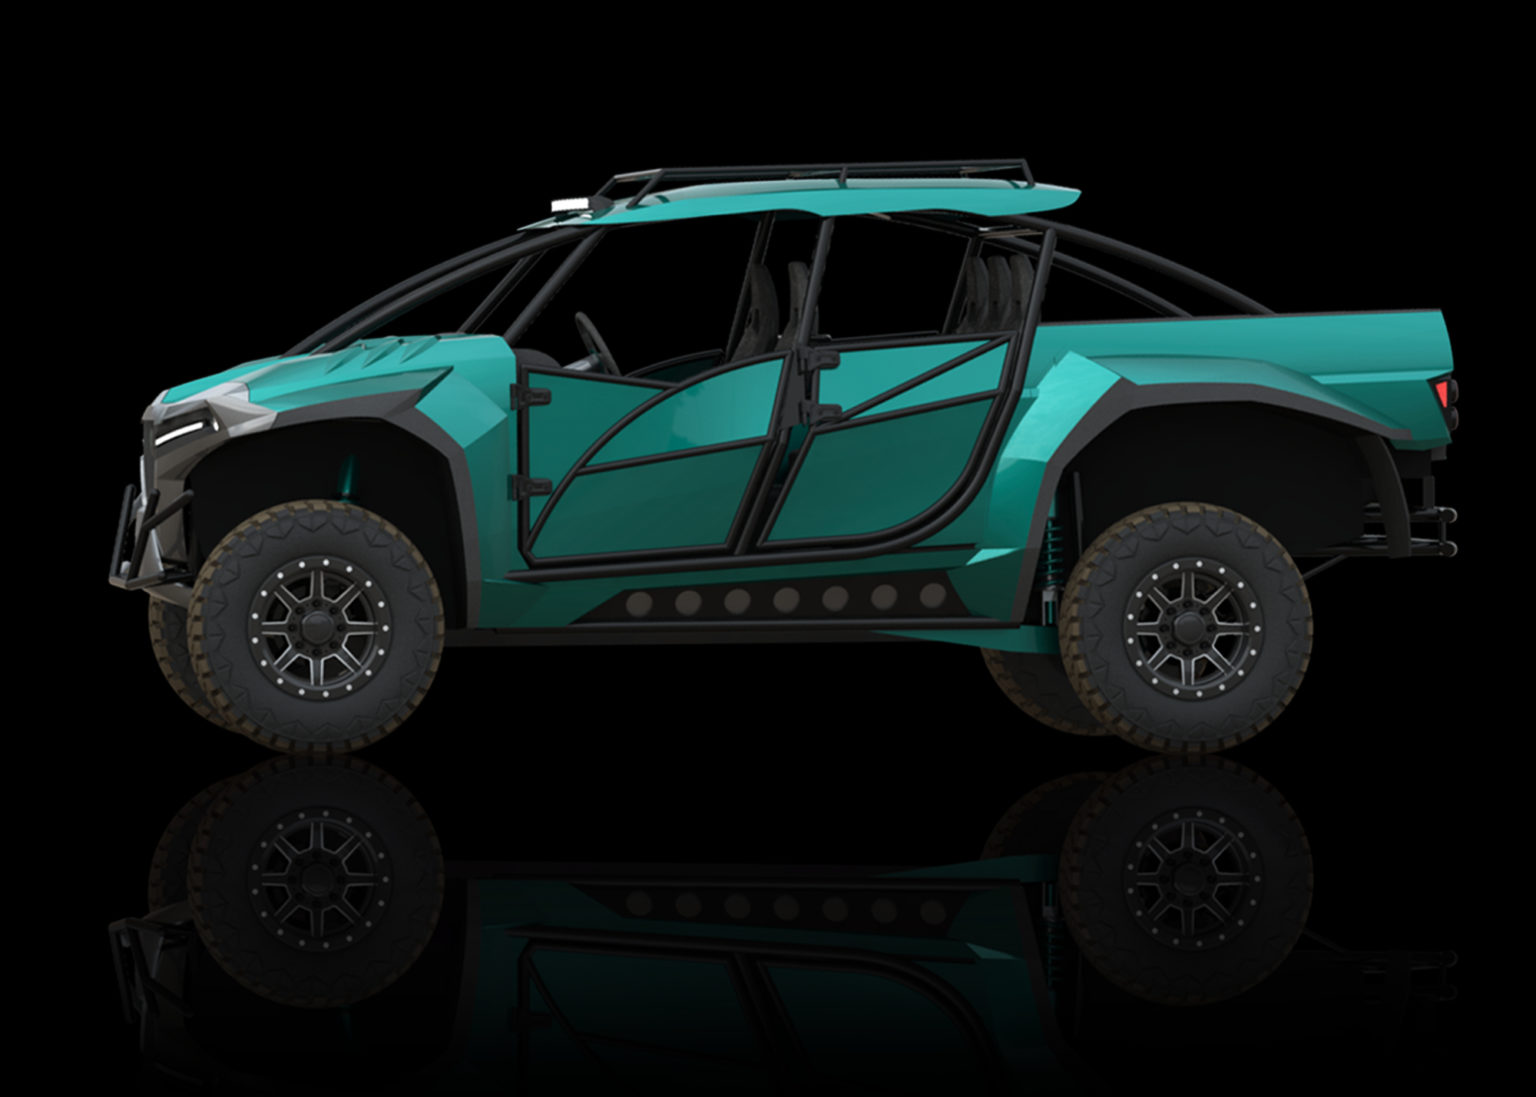 Volcon Beast Electric Off Road Vehicle Notable Distinction